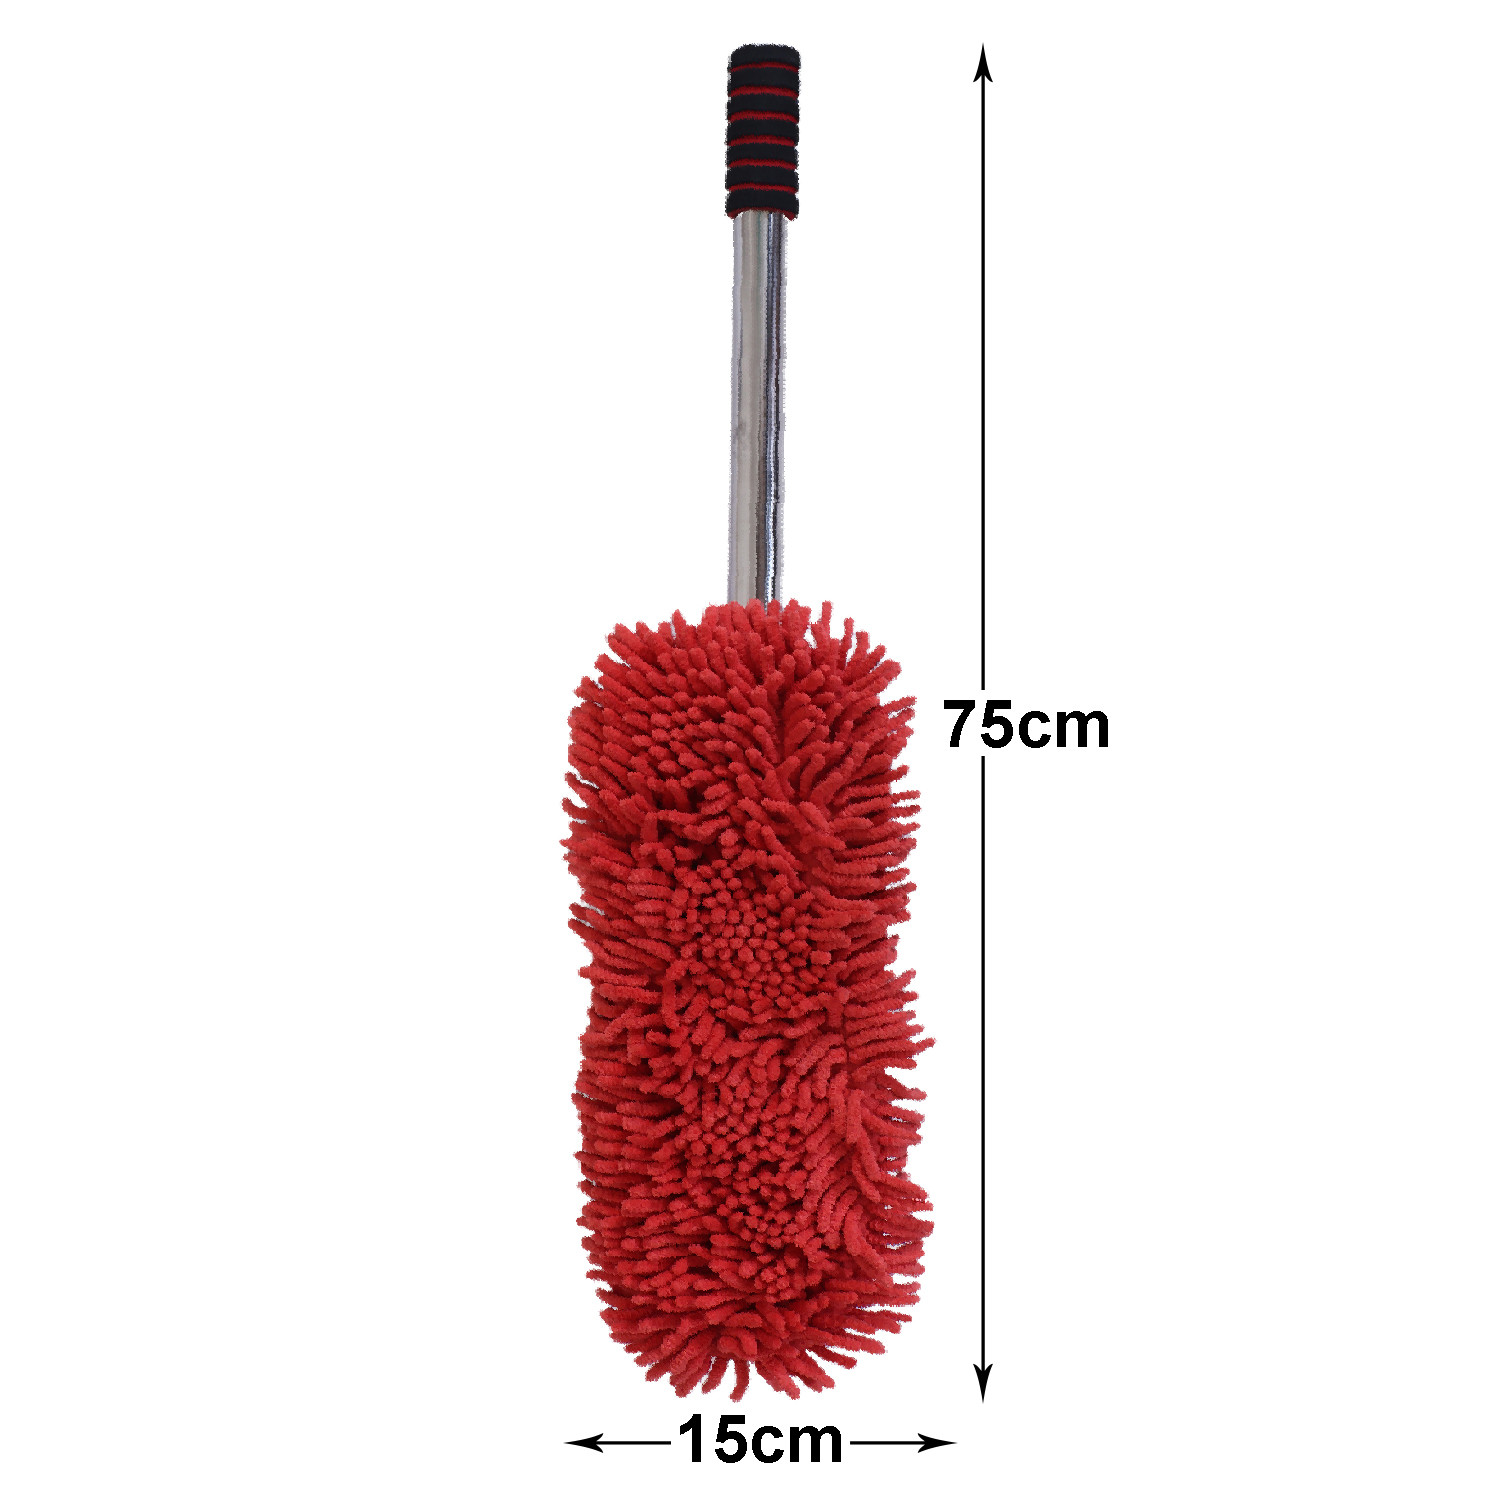 Kuber Industries Microfiber Washable Hand Duster|Stainless Steel Detachable Handle with Cleaning Brush For Car, House Clean (Red)